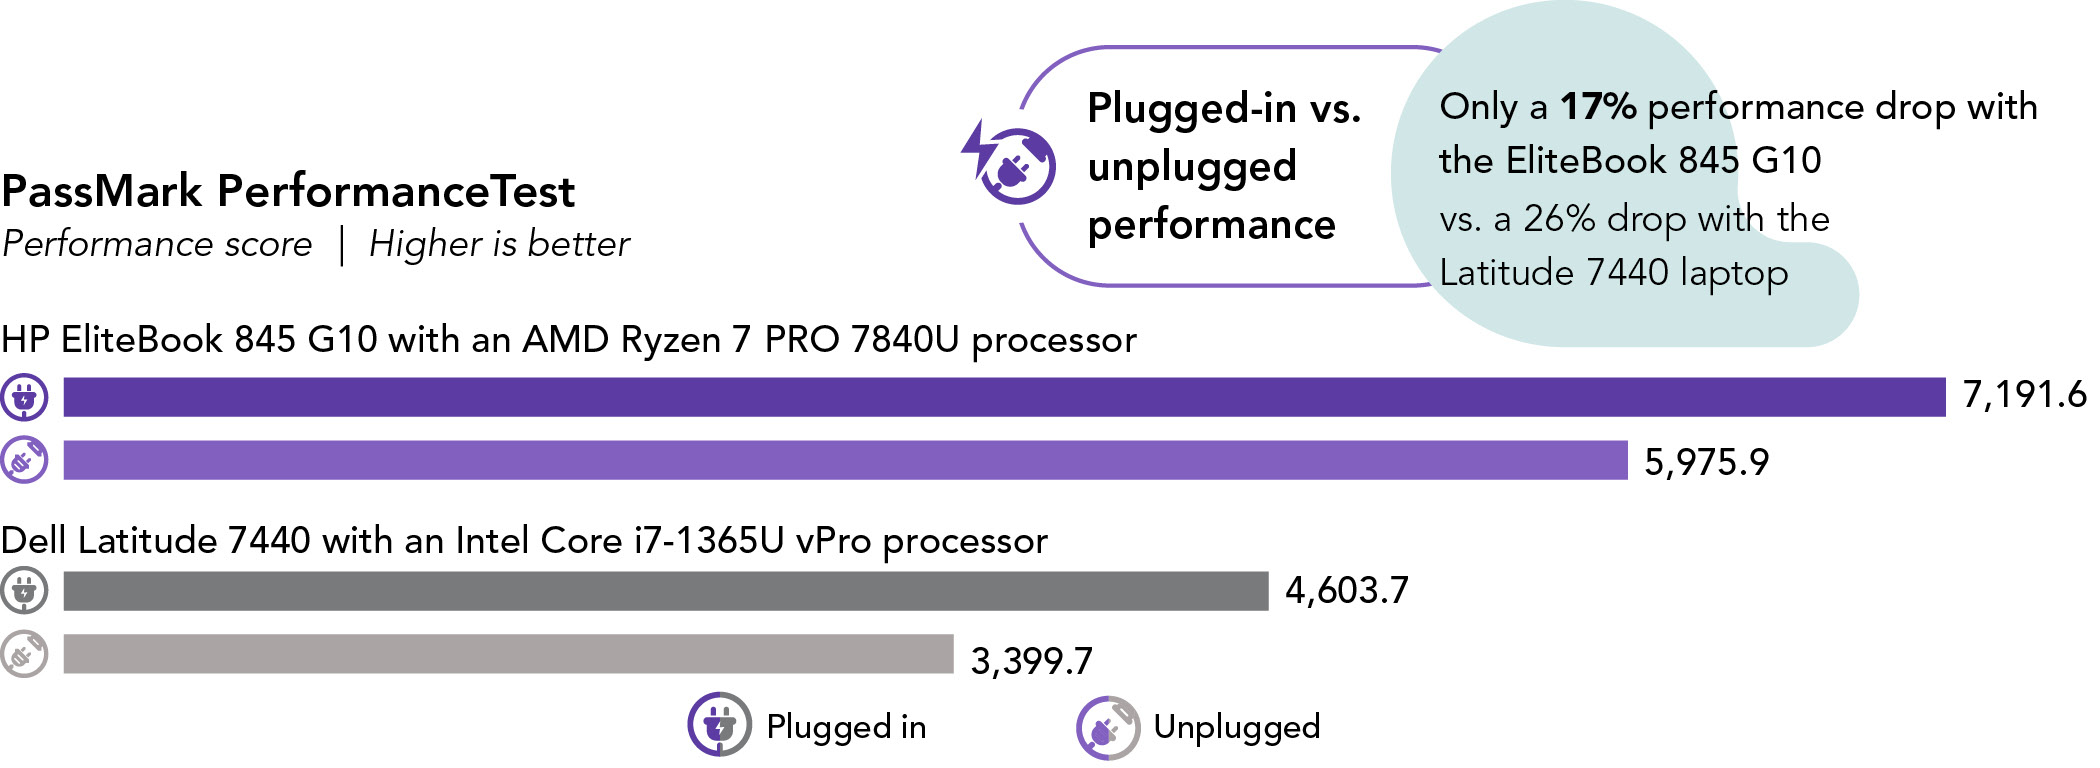 Chart showing PassMark PerformanceTest benchmark performance scores. Higher is better. HP EliteBook 845 G10 shows a score of 7,191.6 plugged in and 5,975.9 unplugged. Dell Latitude 7440 shows a score of 4,603.7 plugged in and 3,399.7 unplugged. Plugged-in vs. unplugged performance: Only a 17% performance drop with the EliteBook 845 G10 vs. a 26% drop with the Latitude 7440 laptop.